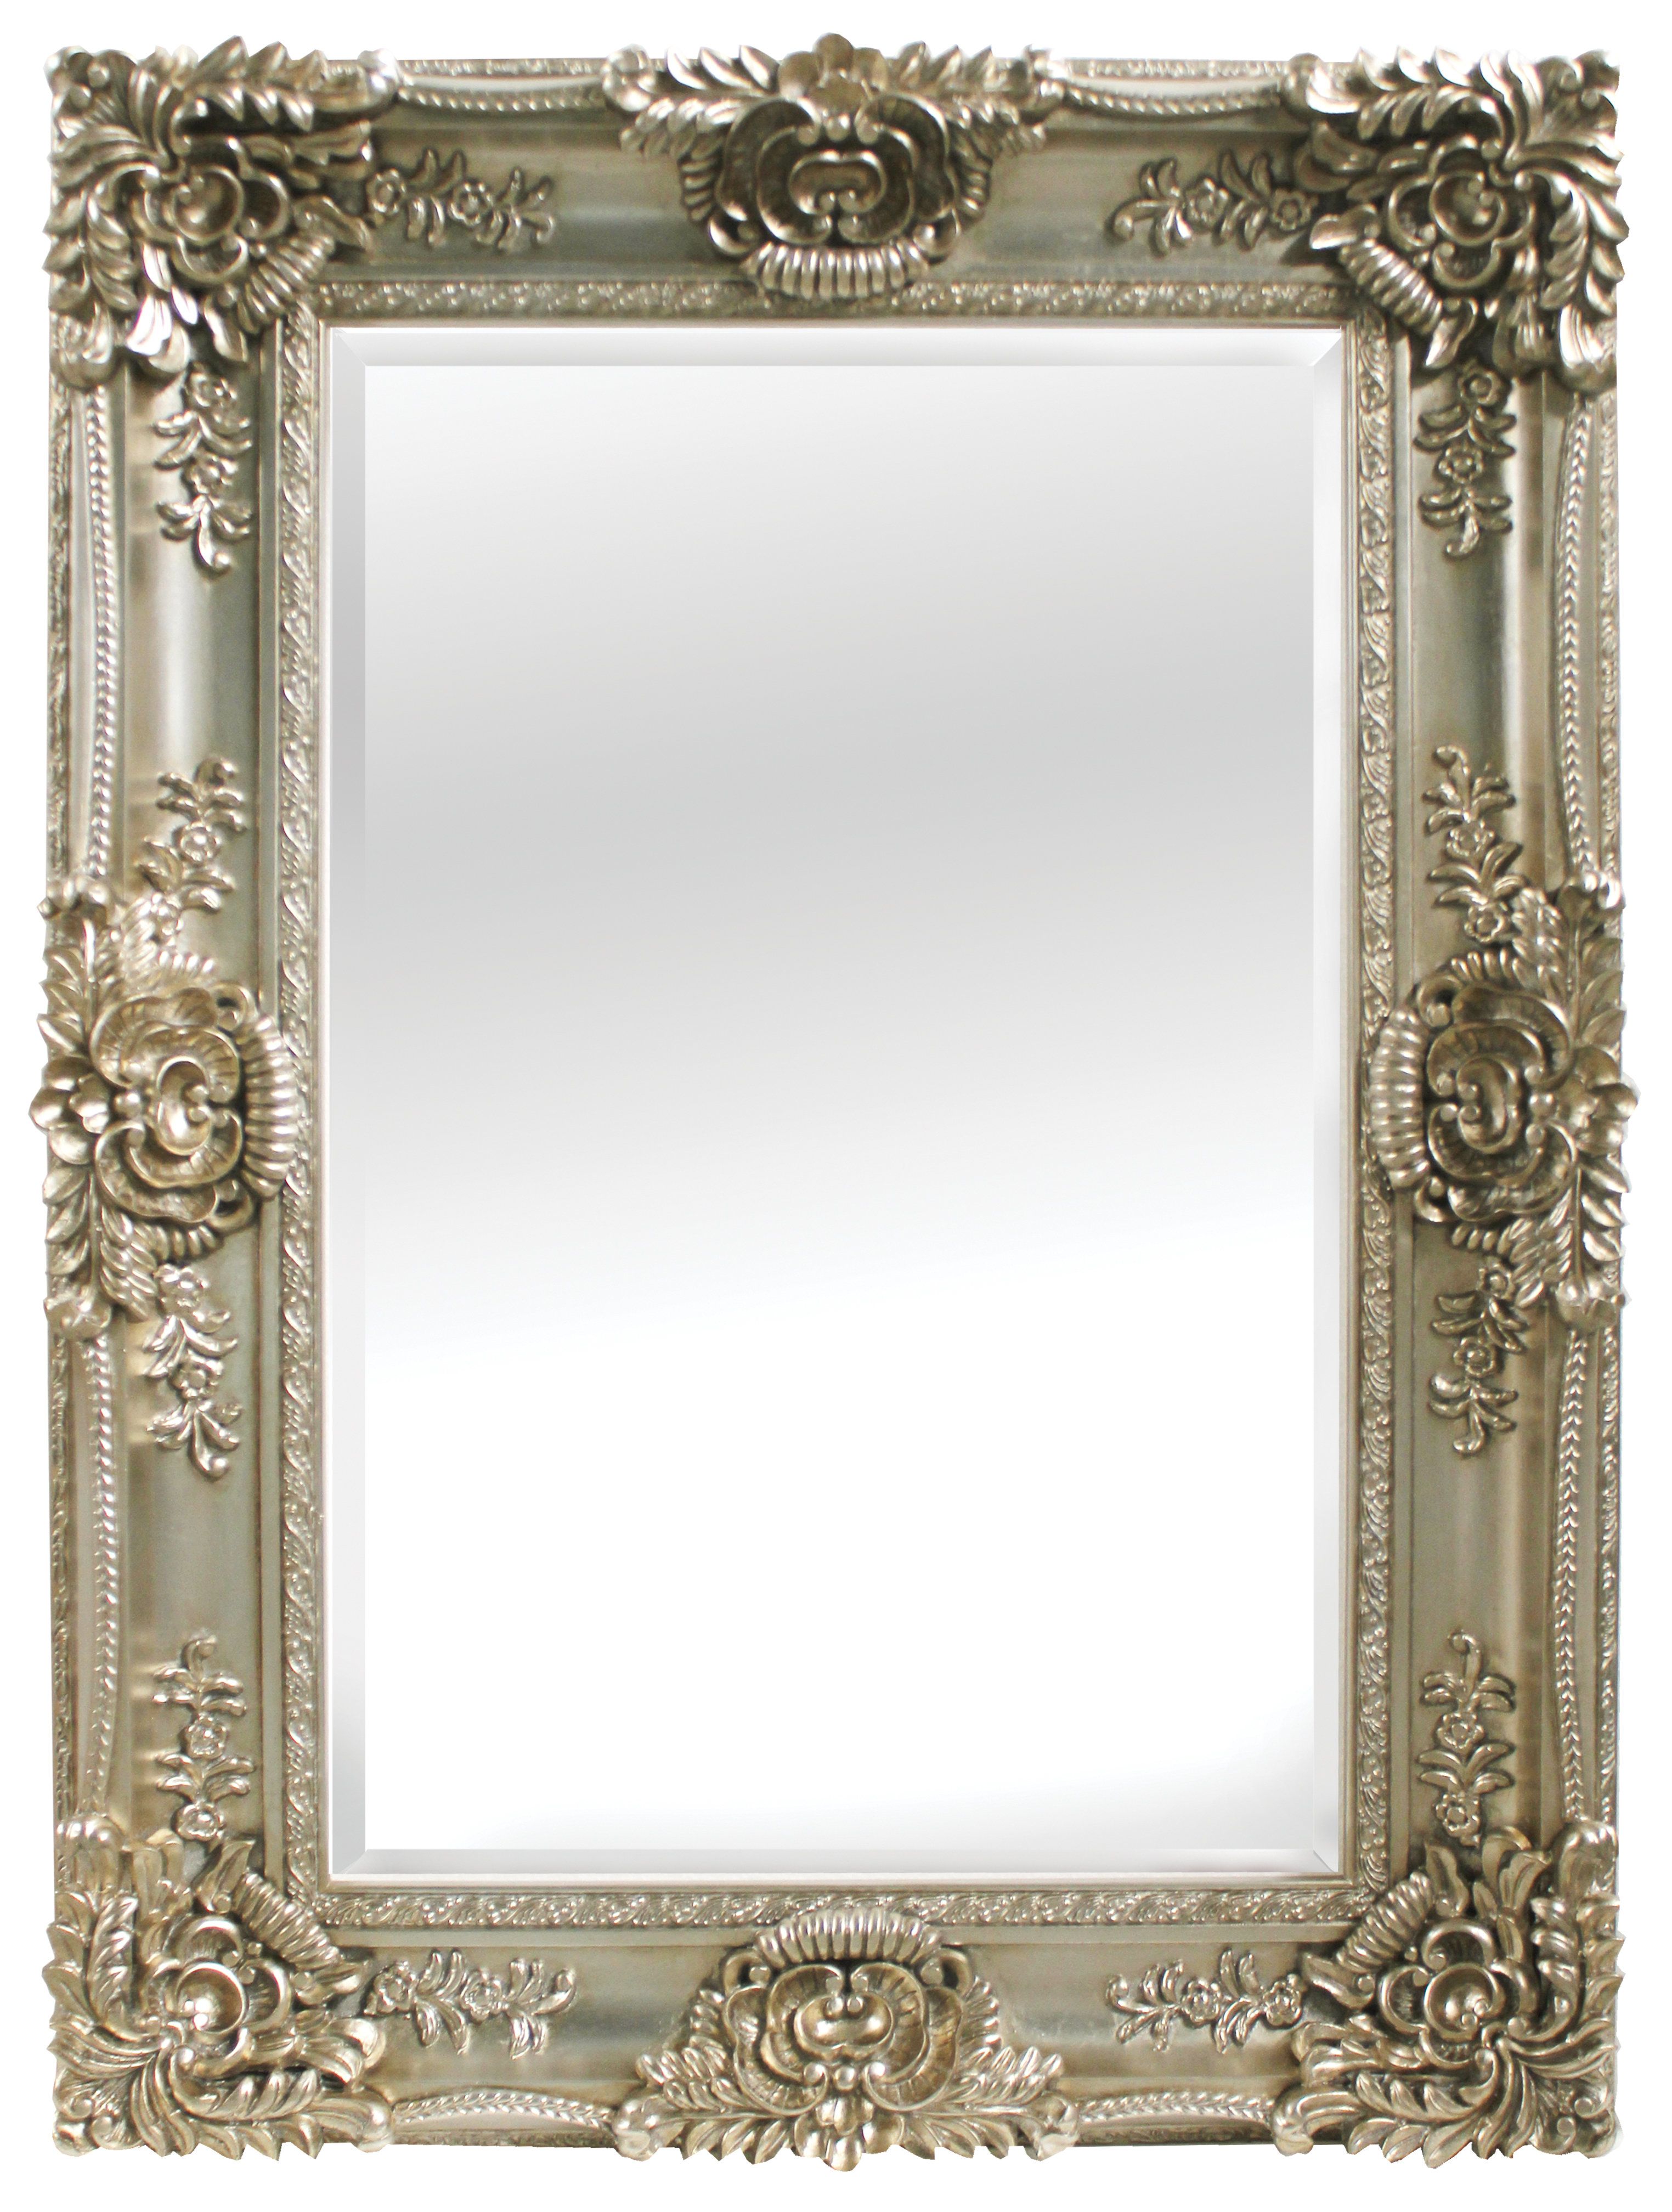 Best And Newest Astoria Grand Beaston Accent Mirror Regarding Gingerich Resin Modern & Contemporary Accent Mirrors (View 20 of 20)